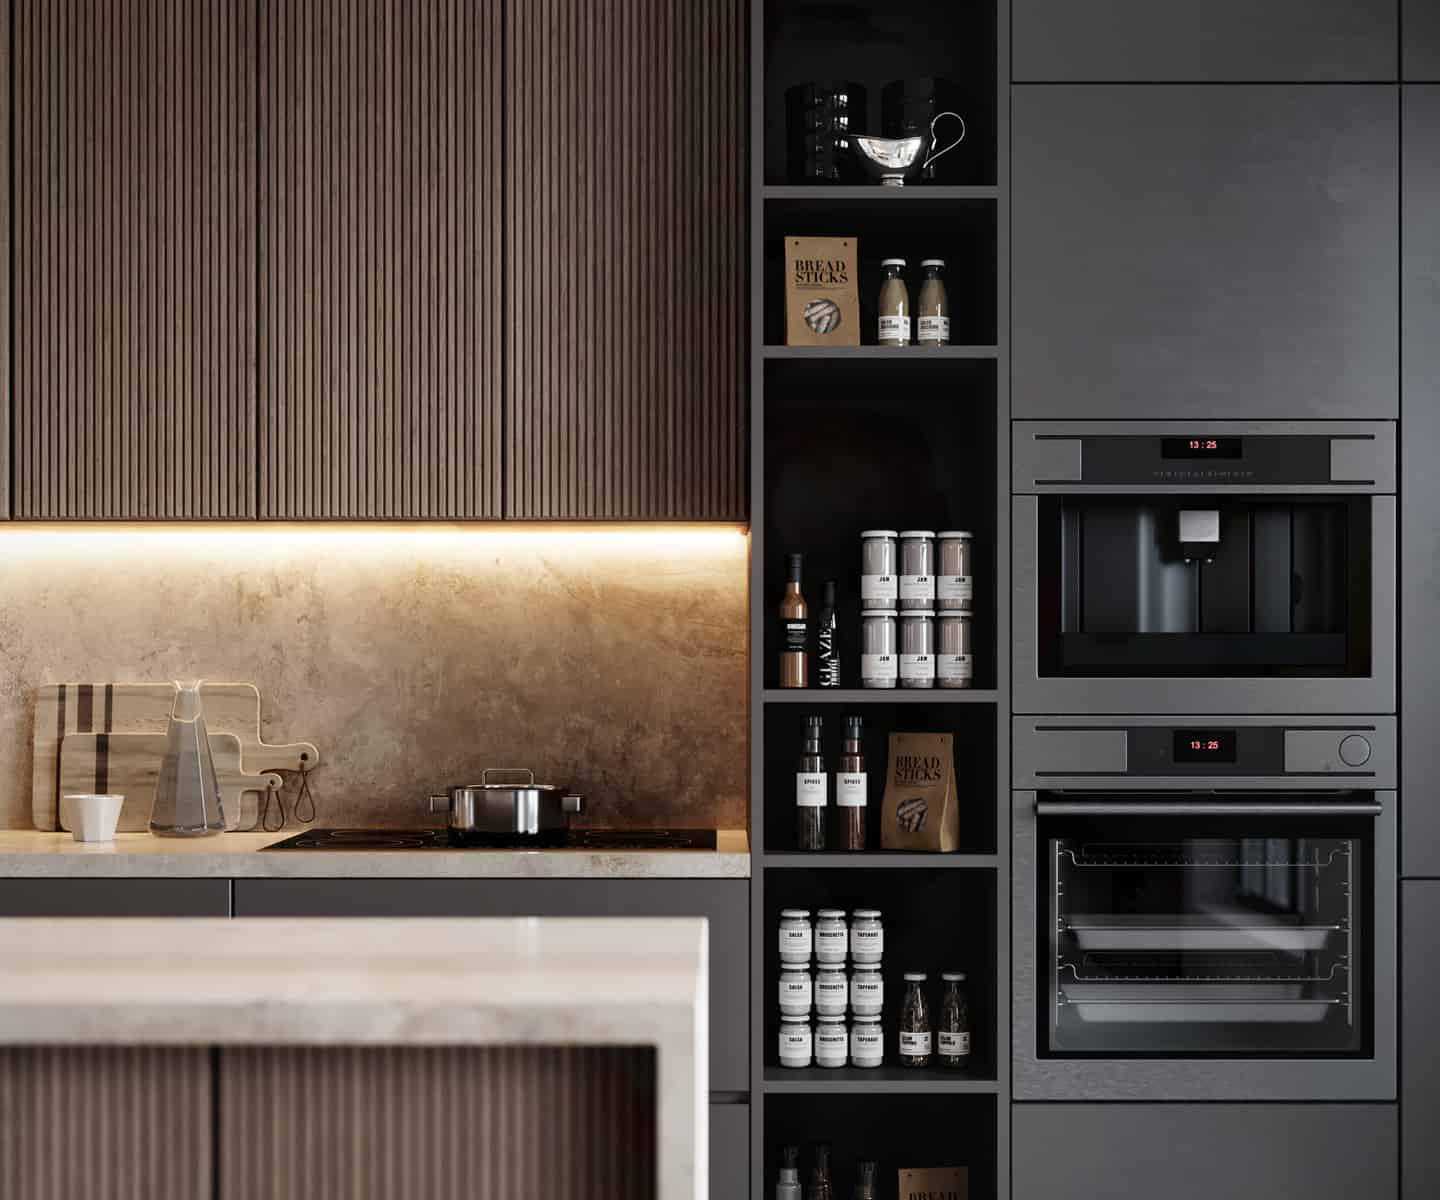  image of a modern kitchen interior design with stoke, shelf and appliances.